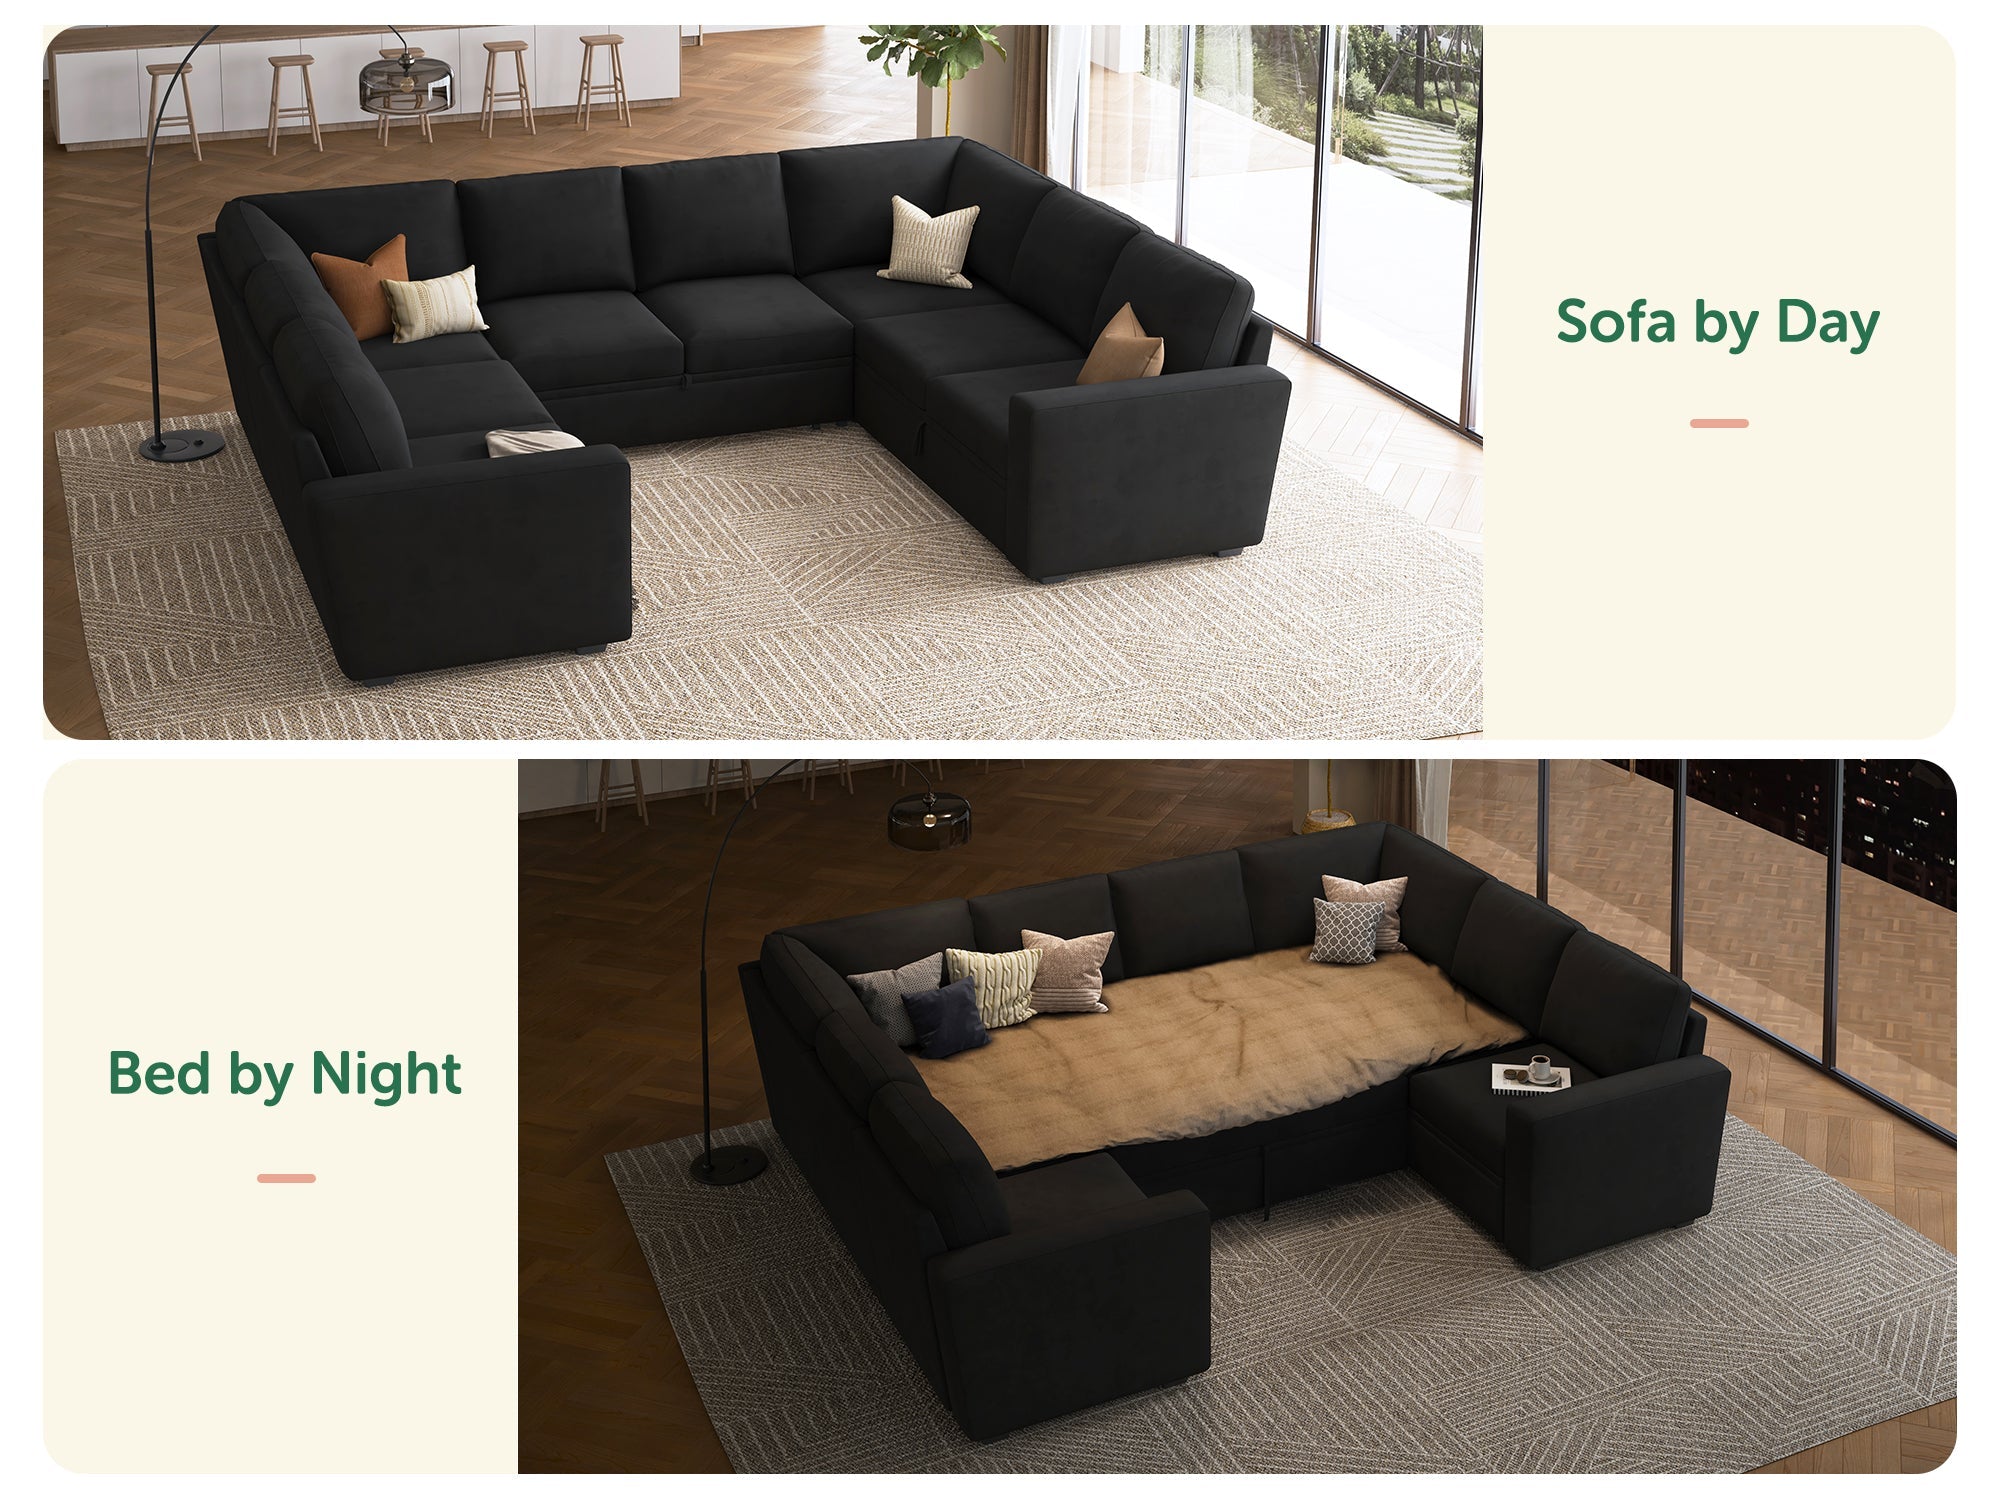 HONBAY 8-Piece Modular Sleeper Sectional With Storage Space #Color_Velvet Black